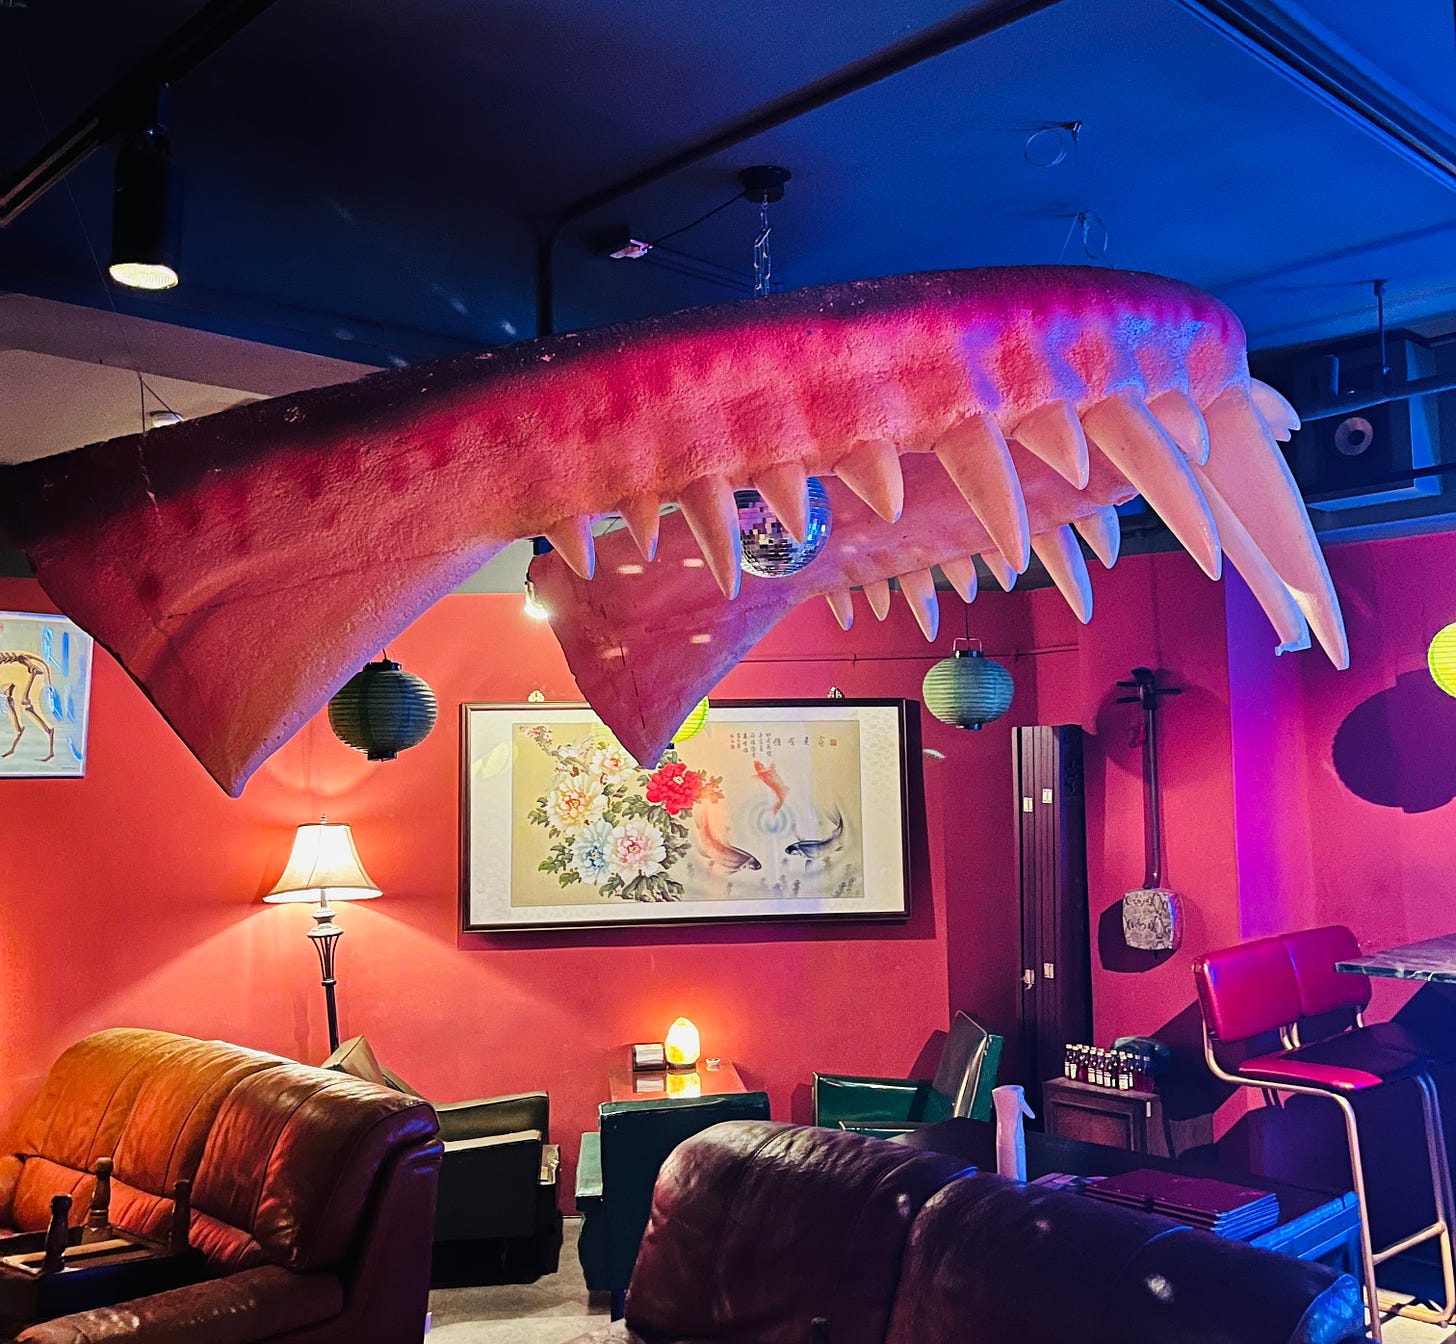 Giant fanged dentures hang over the cozy couches in the dark-ceilinged basement seating area of the Taipei bar Dau